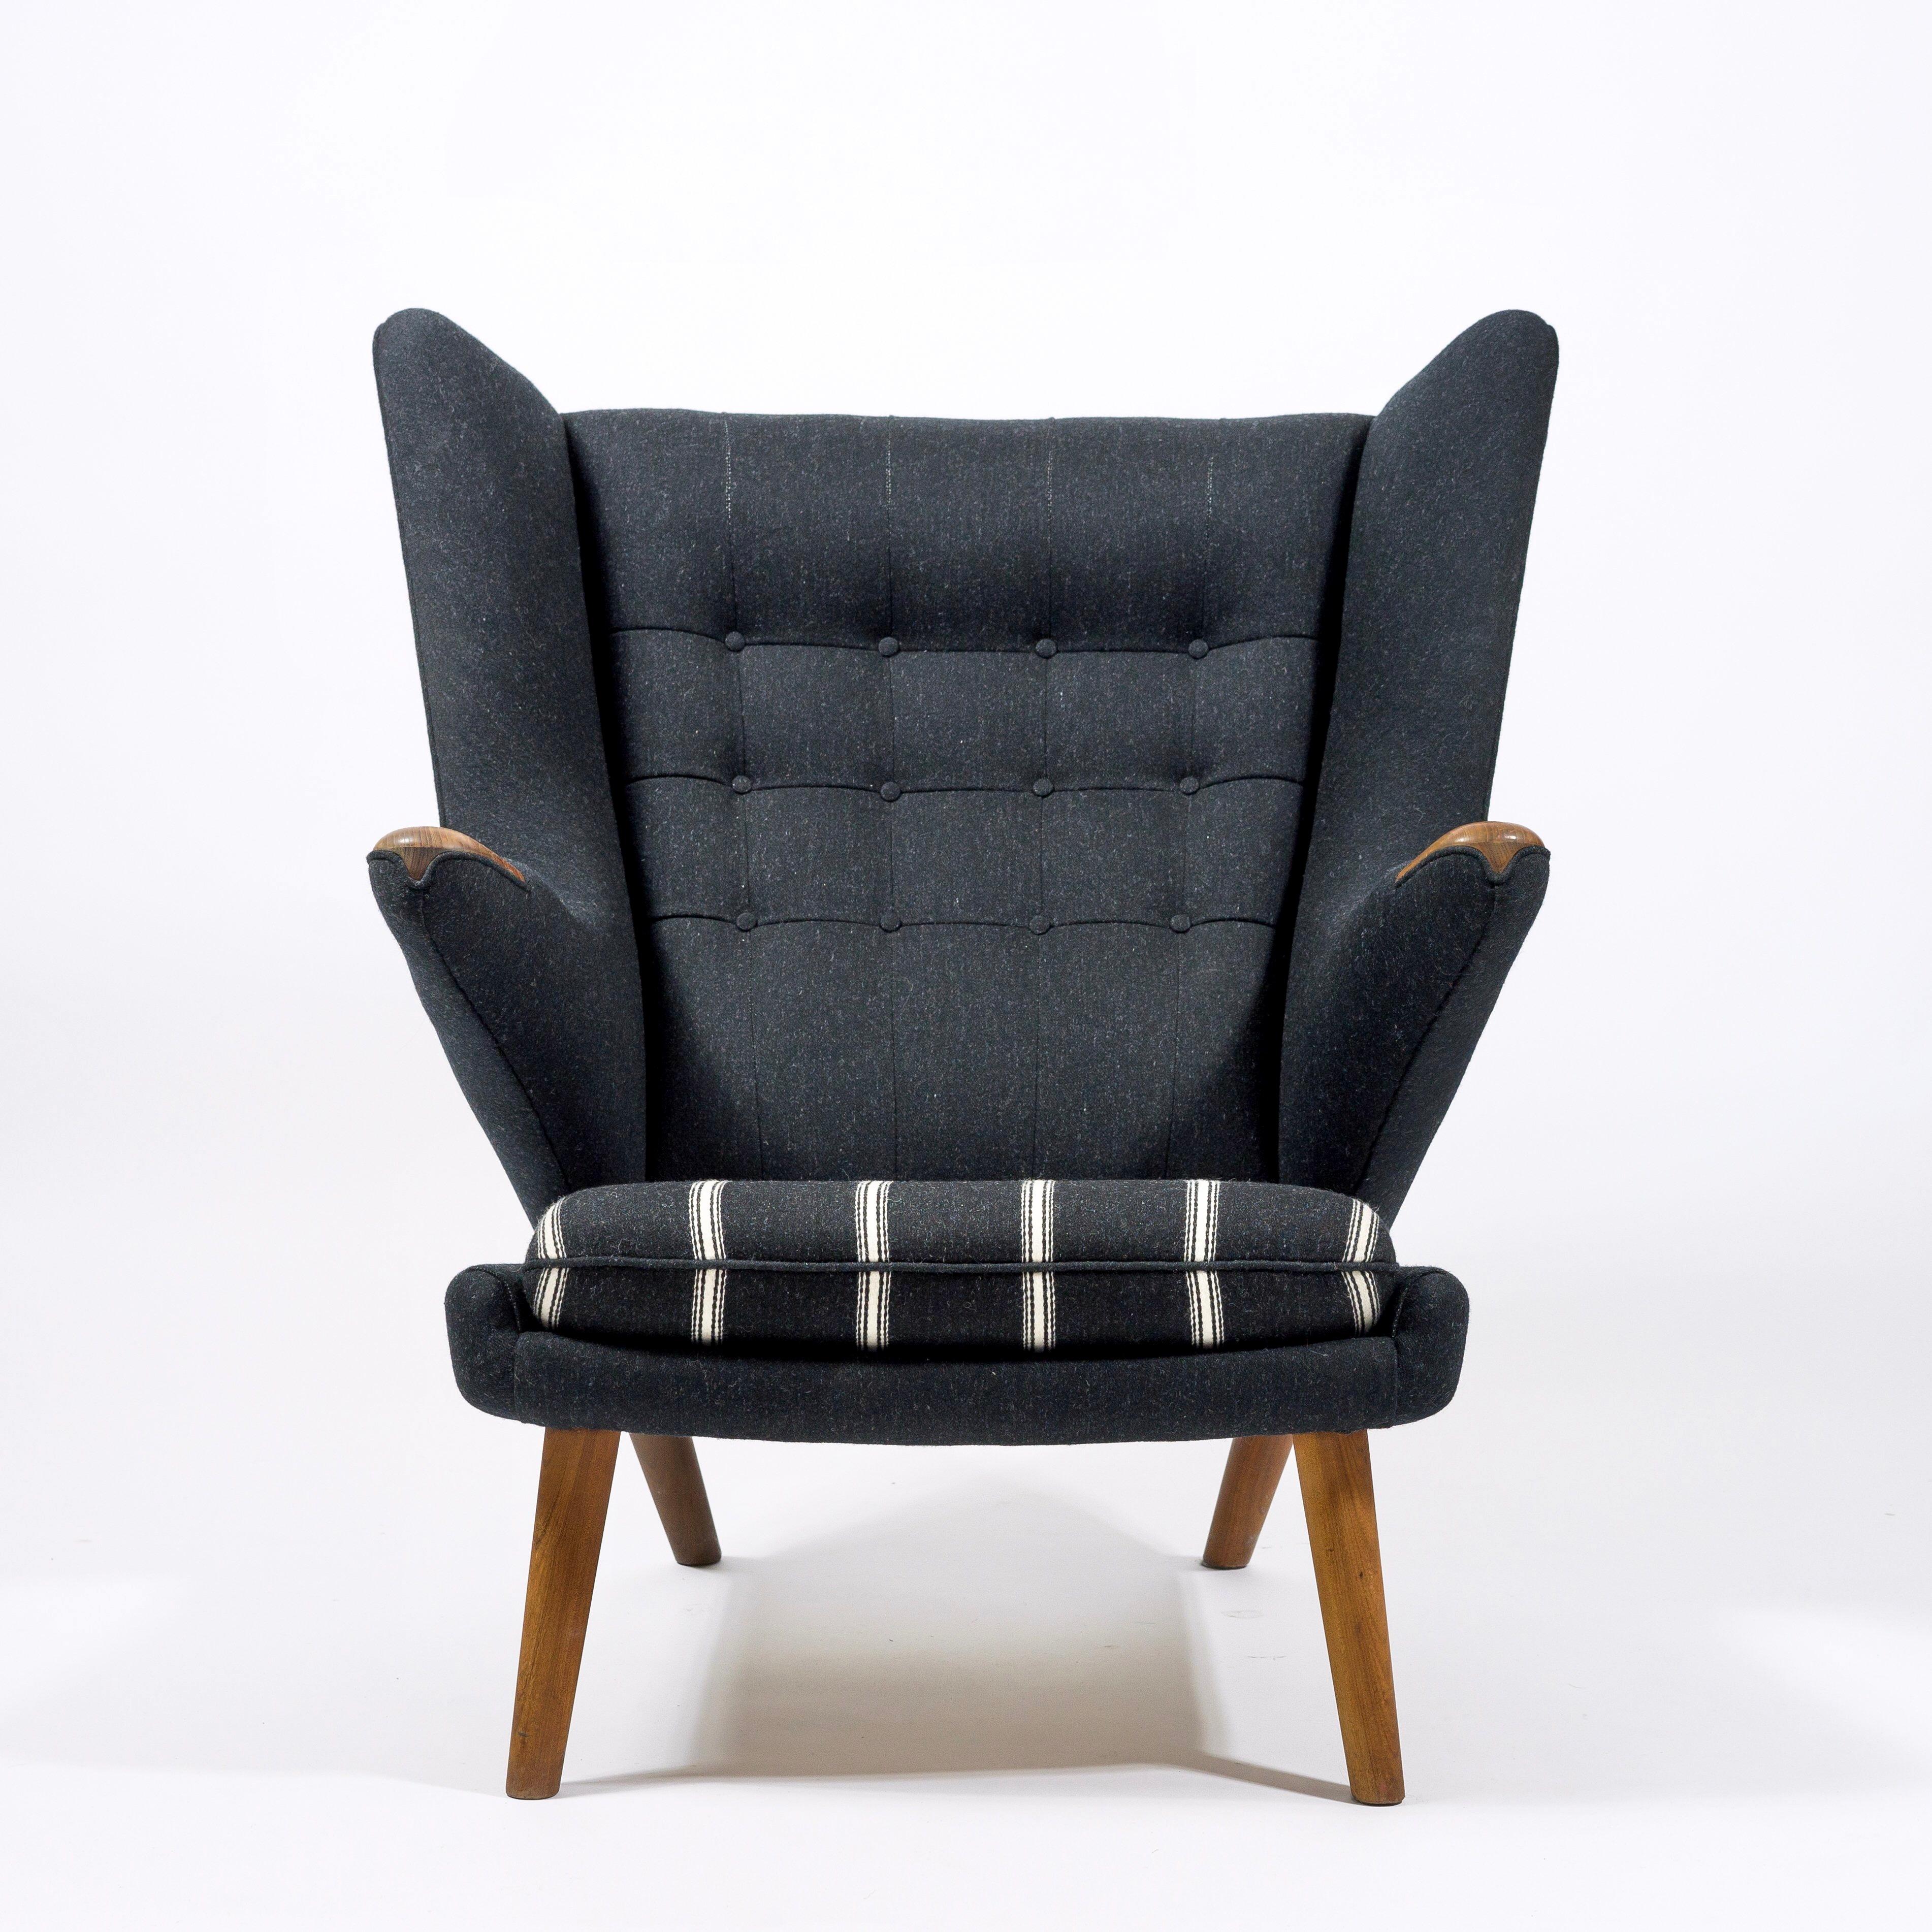 First series of AP 19 lounge chair also called Papa bear chair designed by Hans J. Wegner and manufactured by A.P. Stolen Bamse. Denmark, 1951.
New upholstery.